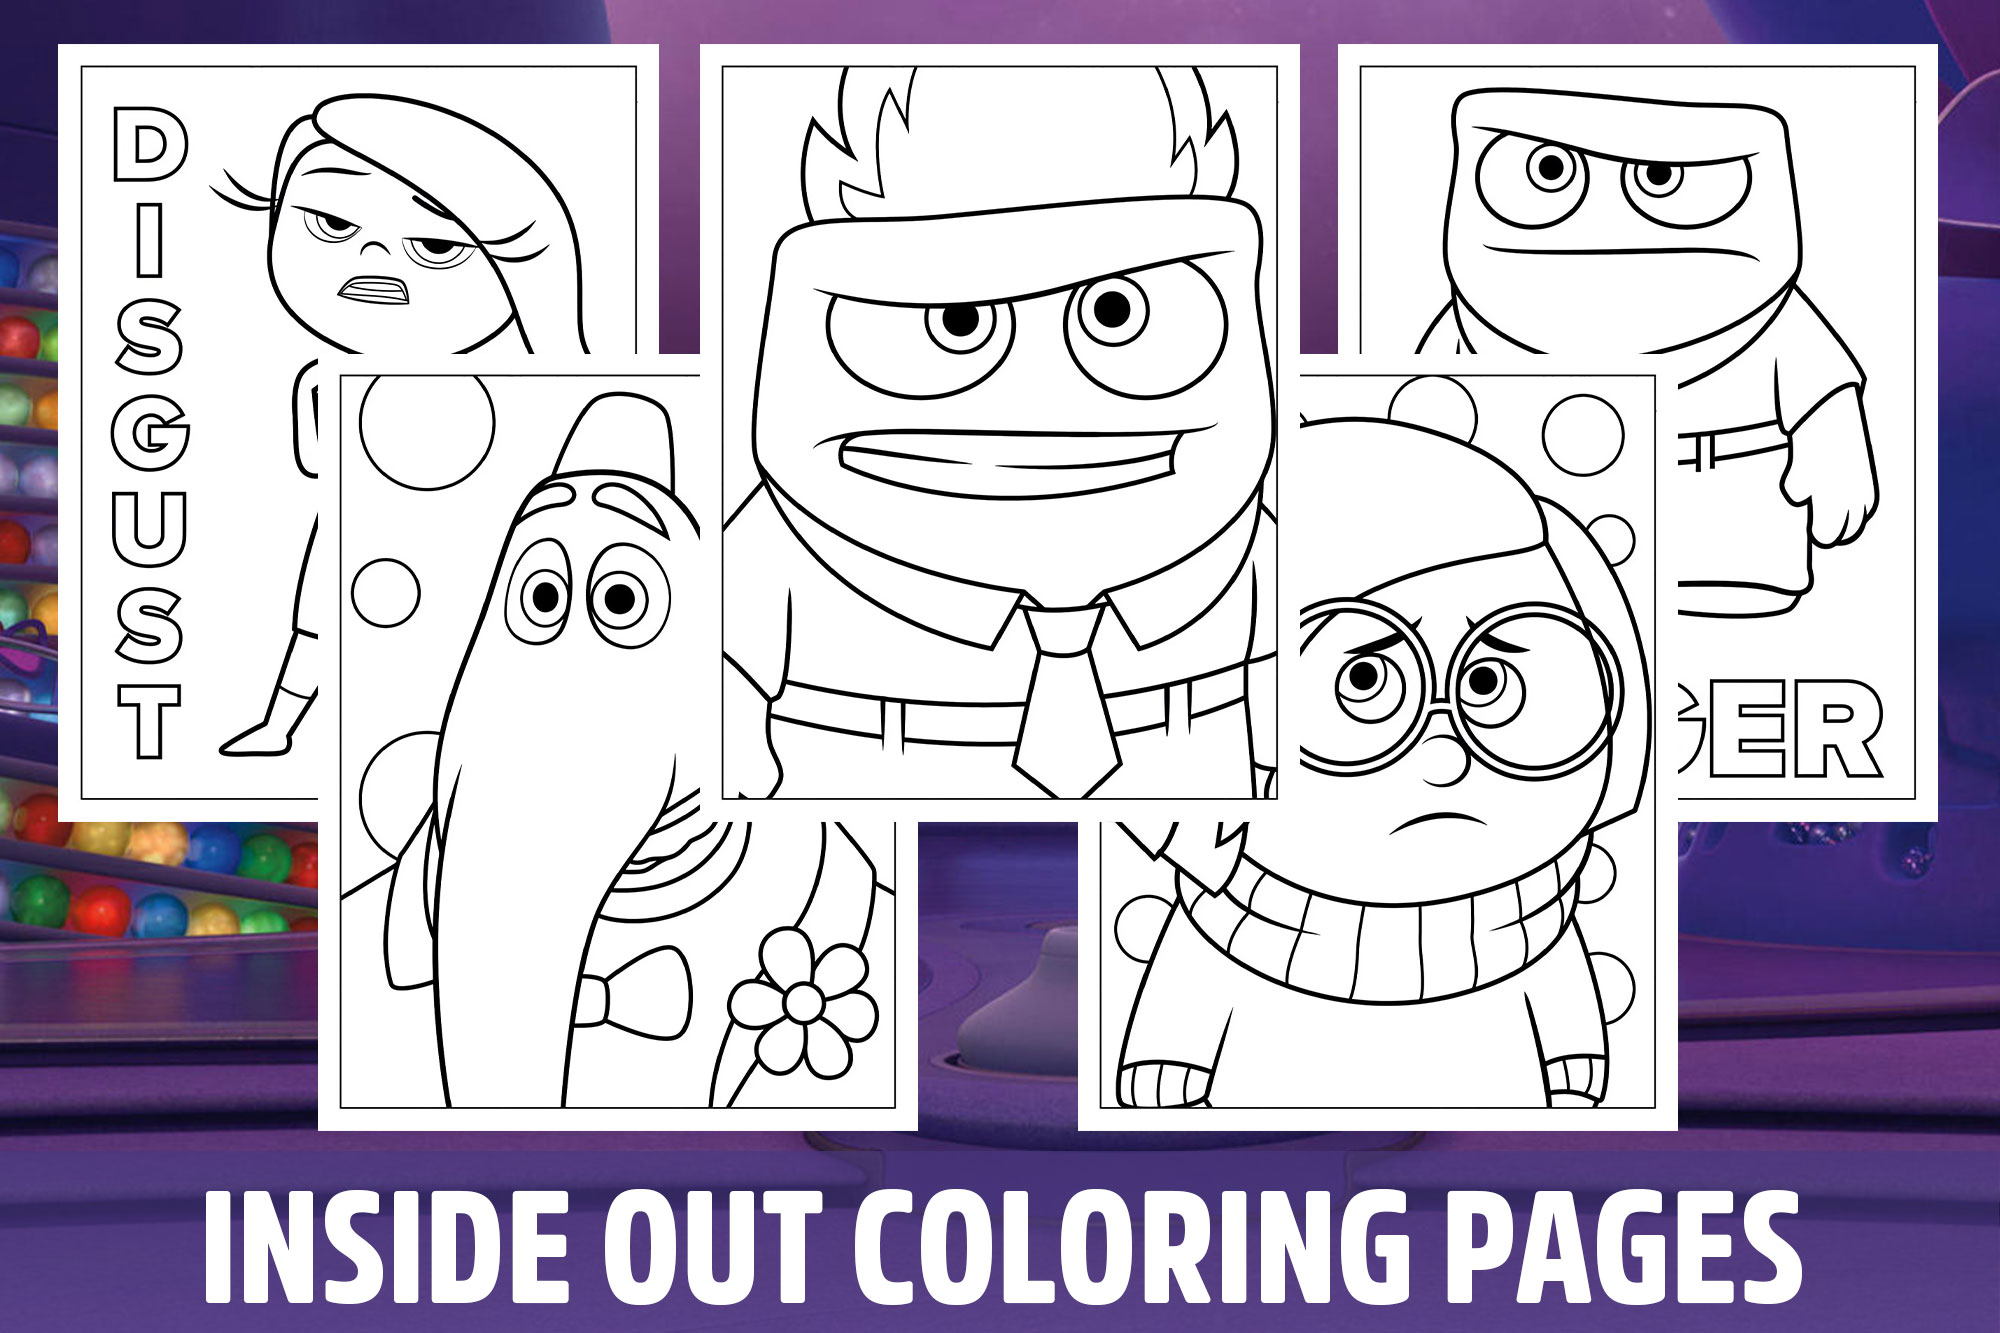 Inside out coloring pages for kids girls boys teens birthday school activity made by teachers